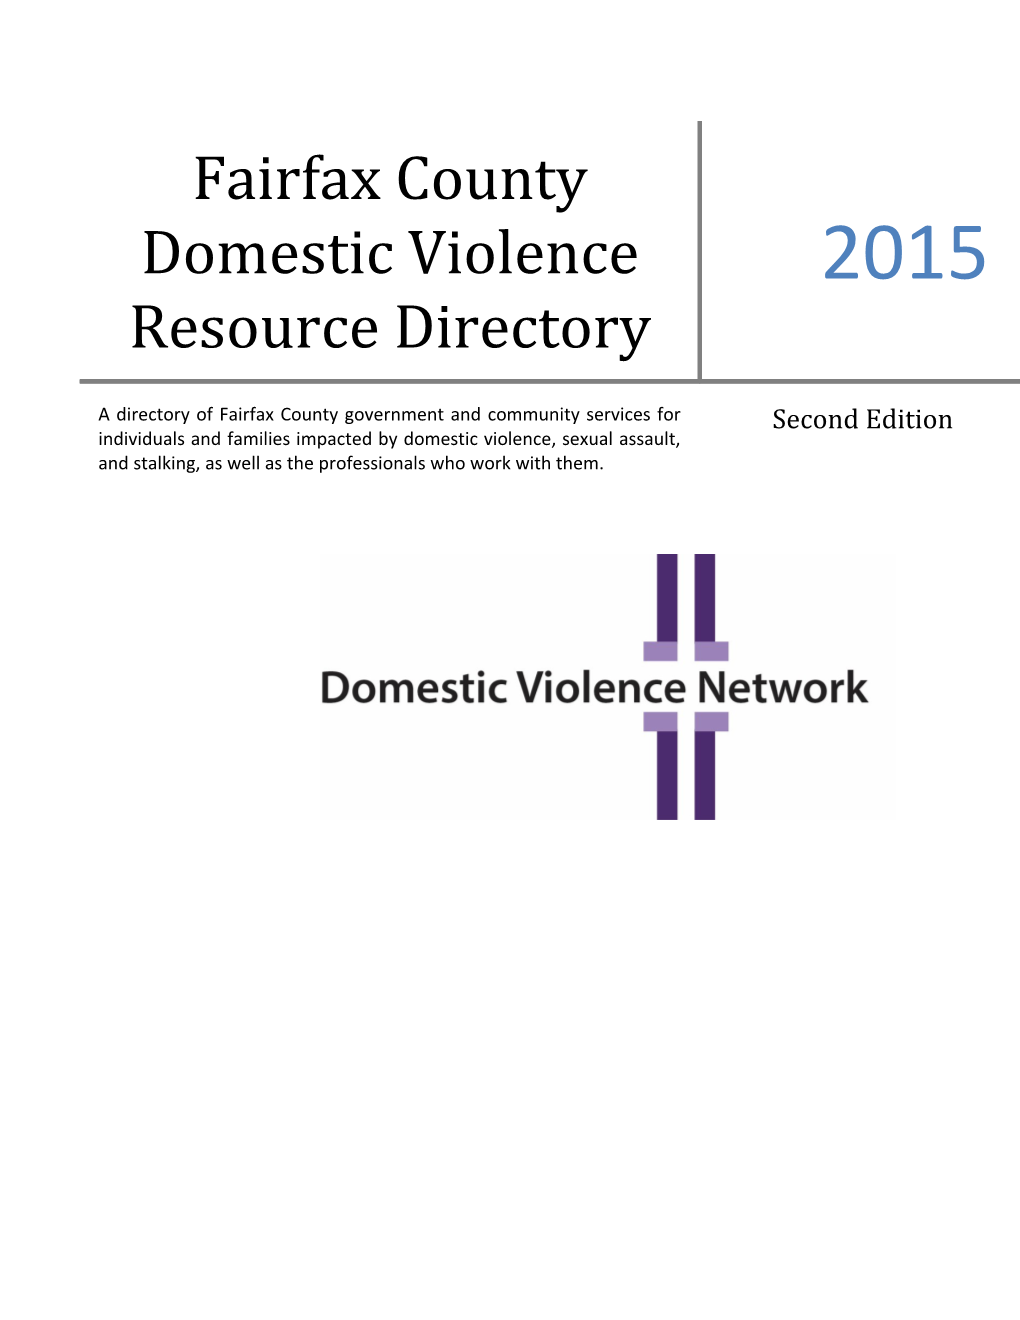 Fairfax County Domestic Violence Resource Directory